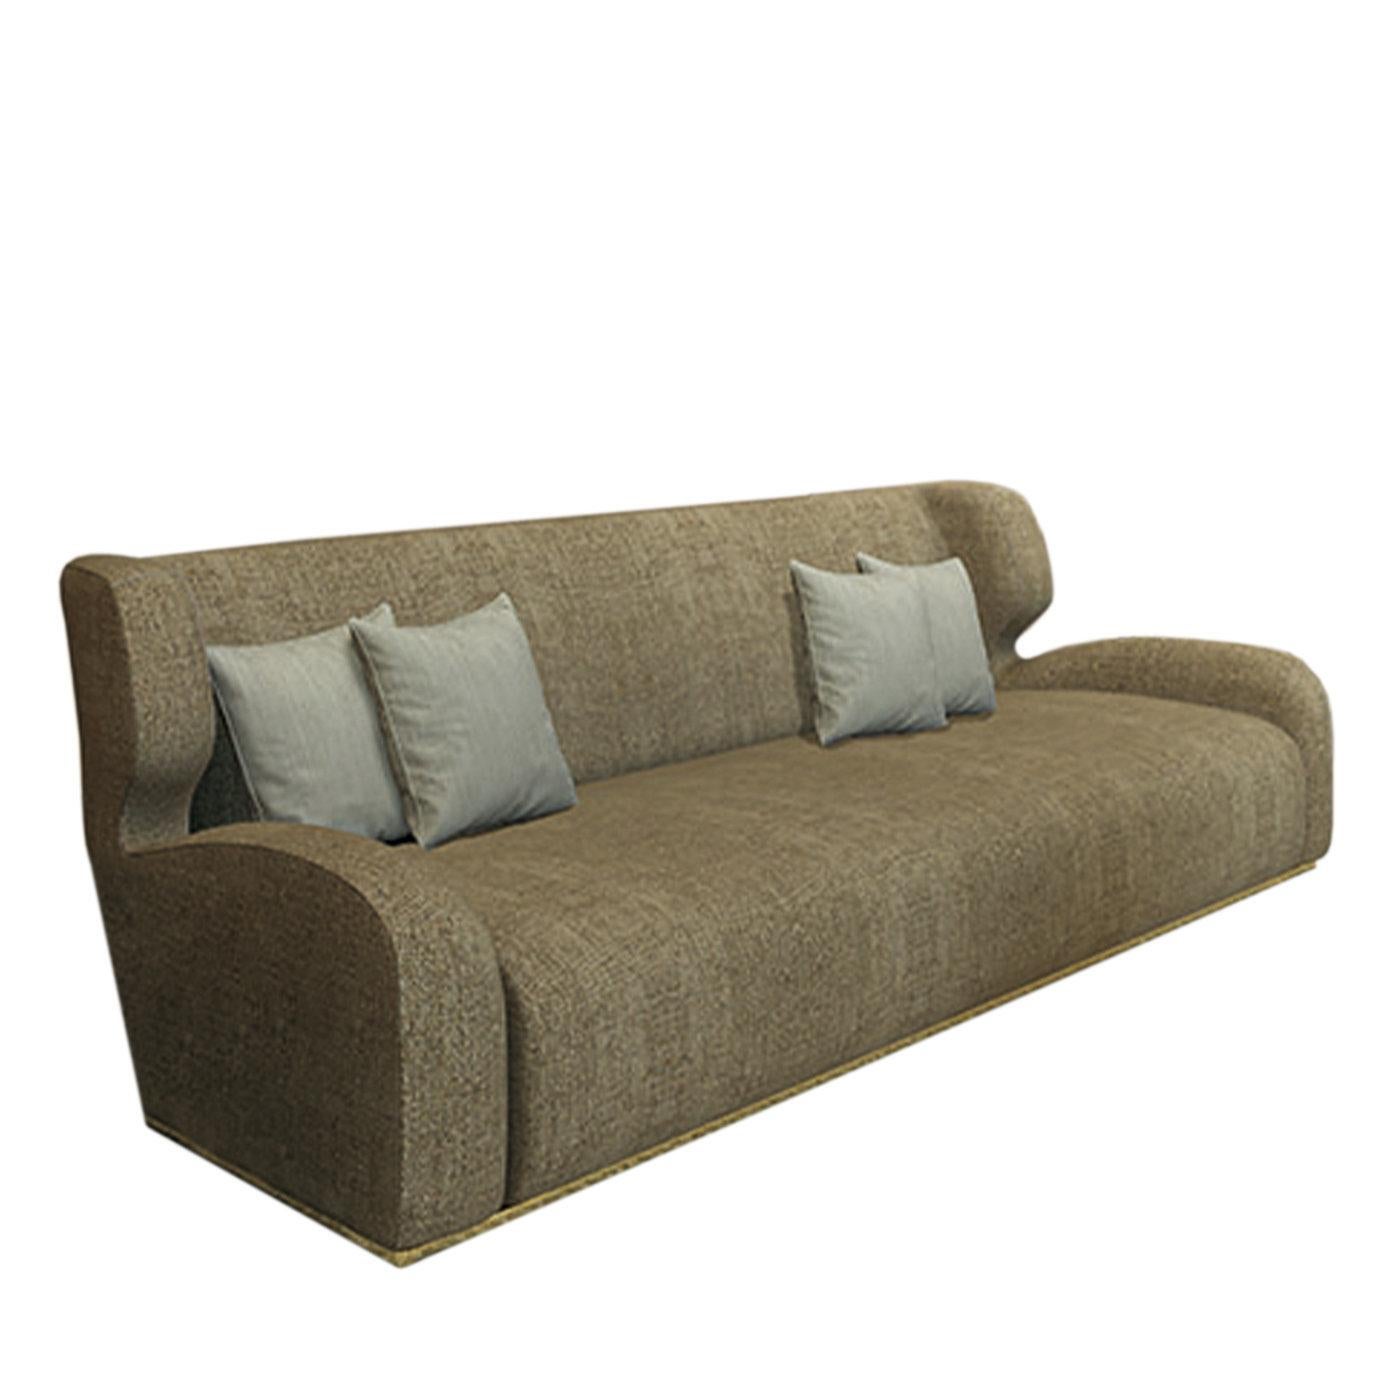 A charming and timeless design by Giannella Ventura dedicated to American cartoonist and partner Barks, this sofa will effortlessly adorn any stylish modern interior. Mounted on a shiny brass base, it is defined by soft and welcoming lines